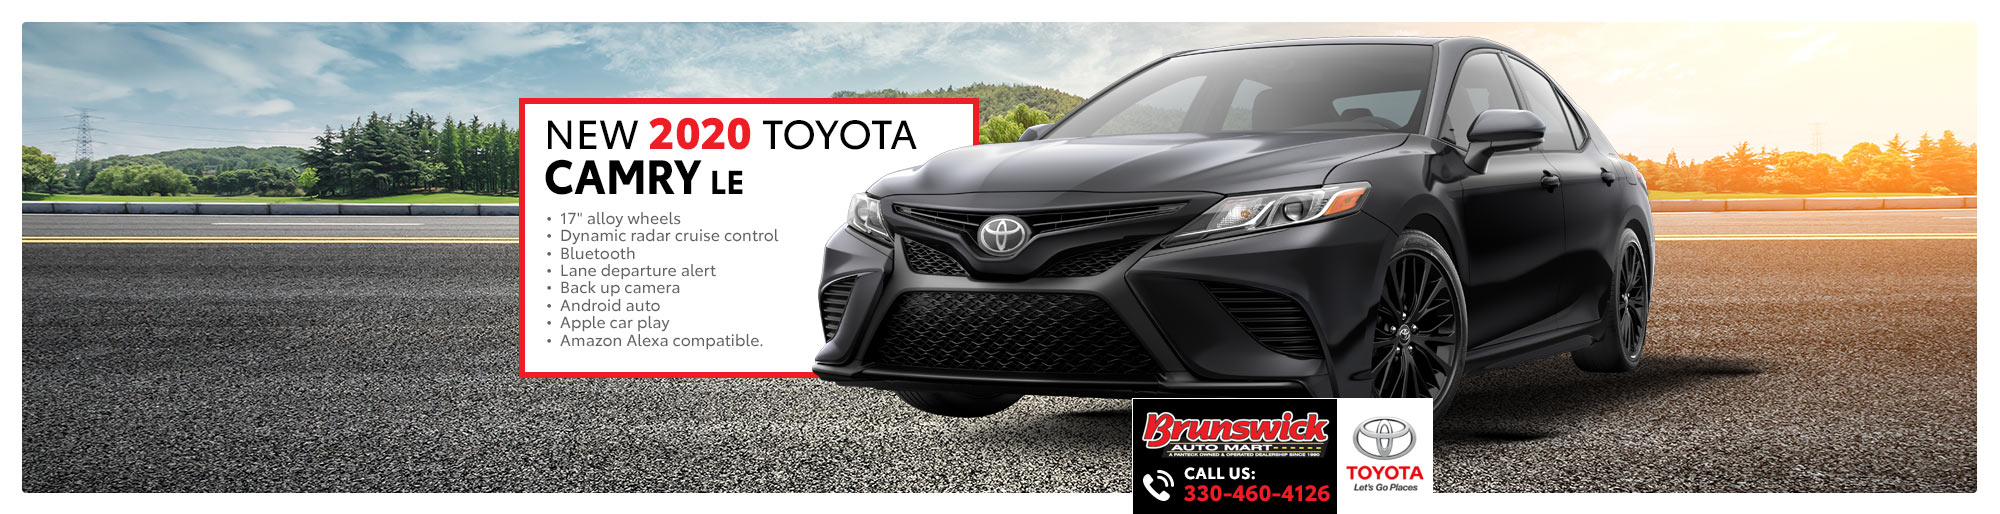 2020-toyota-camry-le-special-buy-for-22-619-with-2-000-rebate-or-0